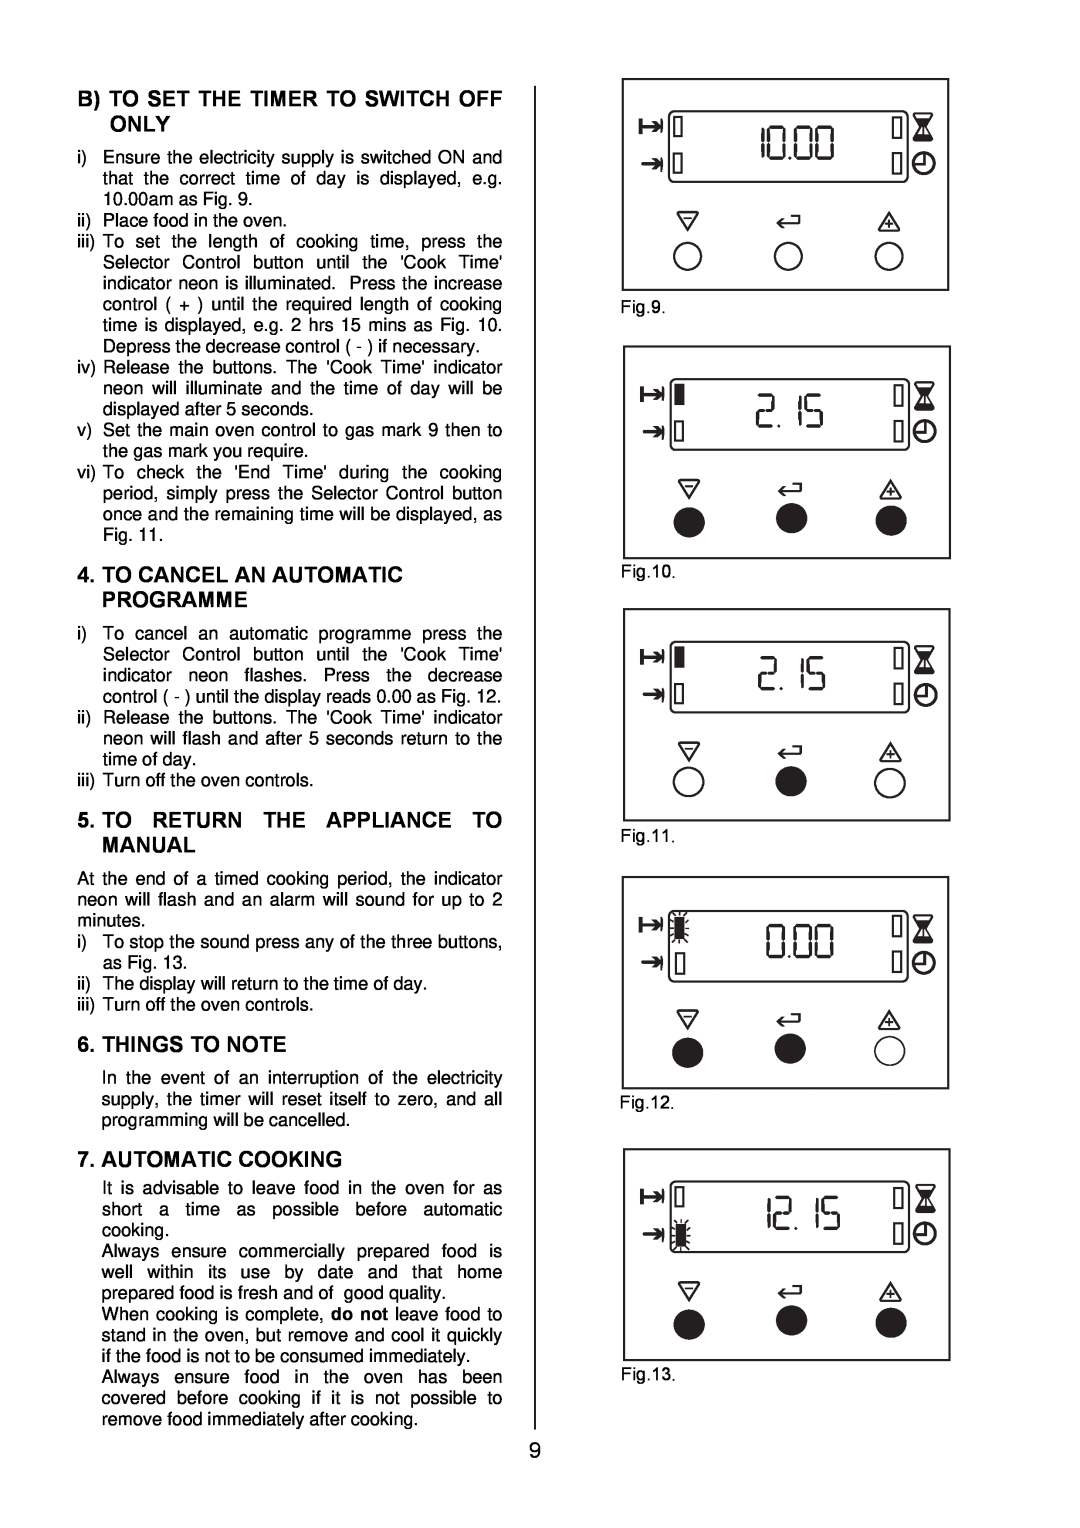 Electrolux EKG6049 user manual B To Set The Timer To Switch Off Only, To Cancel An Automatic Programme, Things To Note 